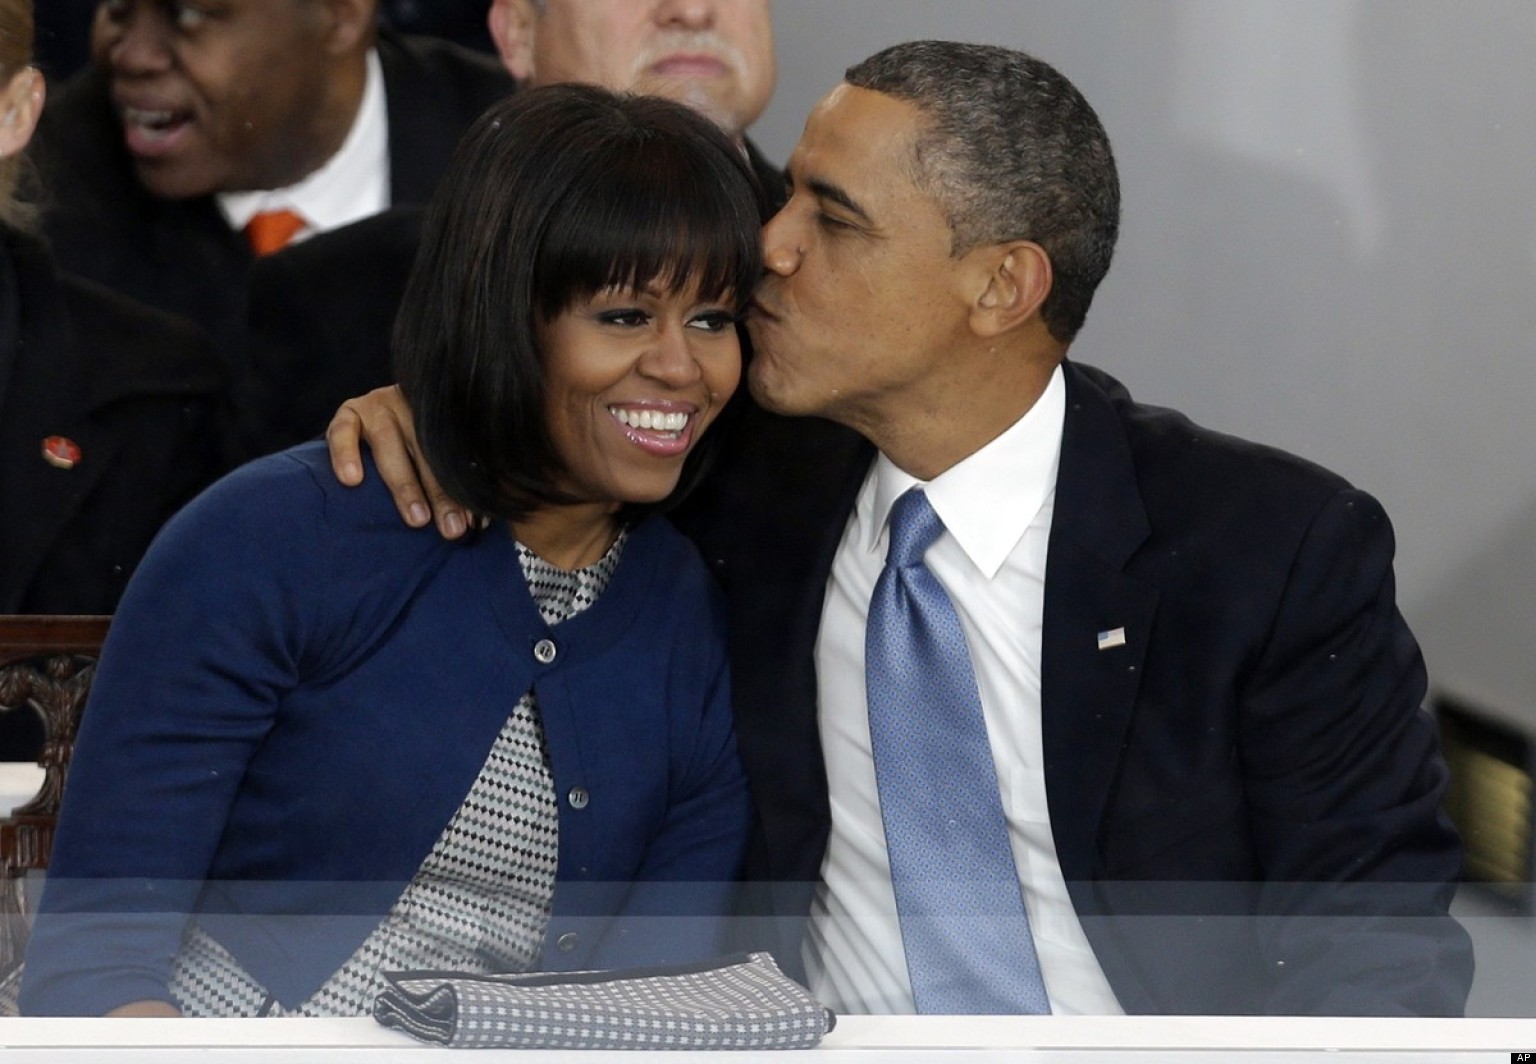 Obama Kiss: The Best Smooches From The Presidential Inauguration (PHOTOS) | HuffPost